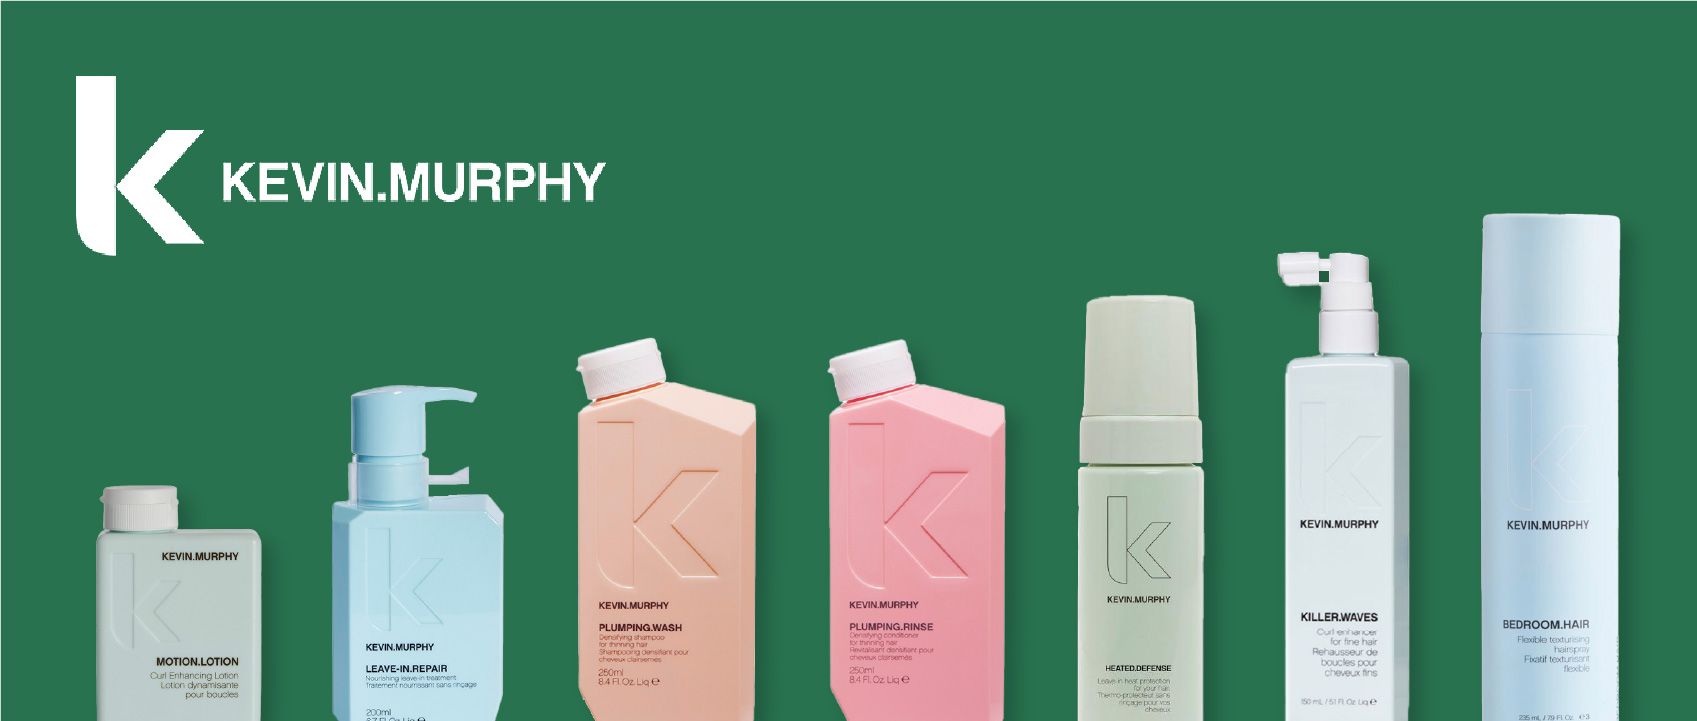 we're proud to offer our clients the exceptional quality and innovation of Kevin Murphy hair care products.